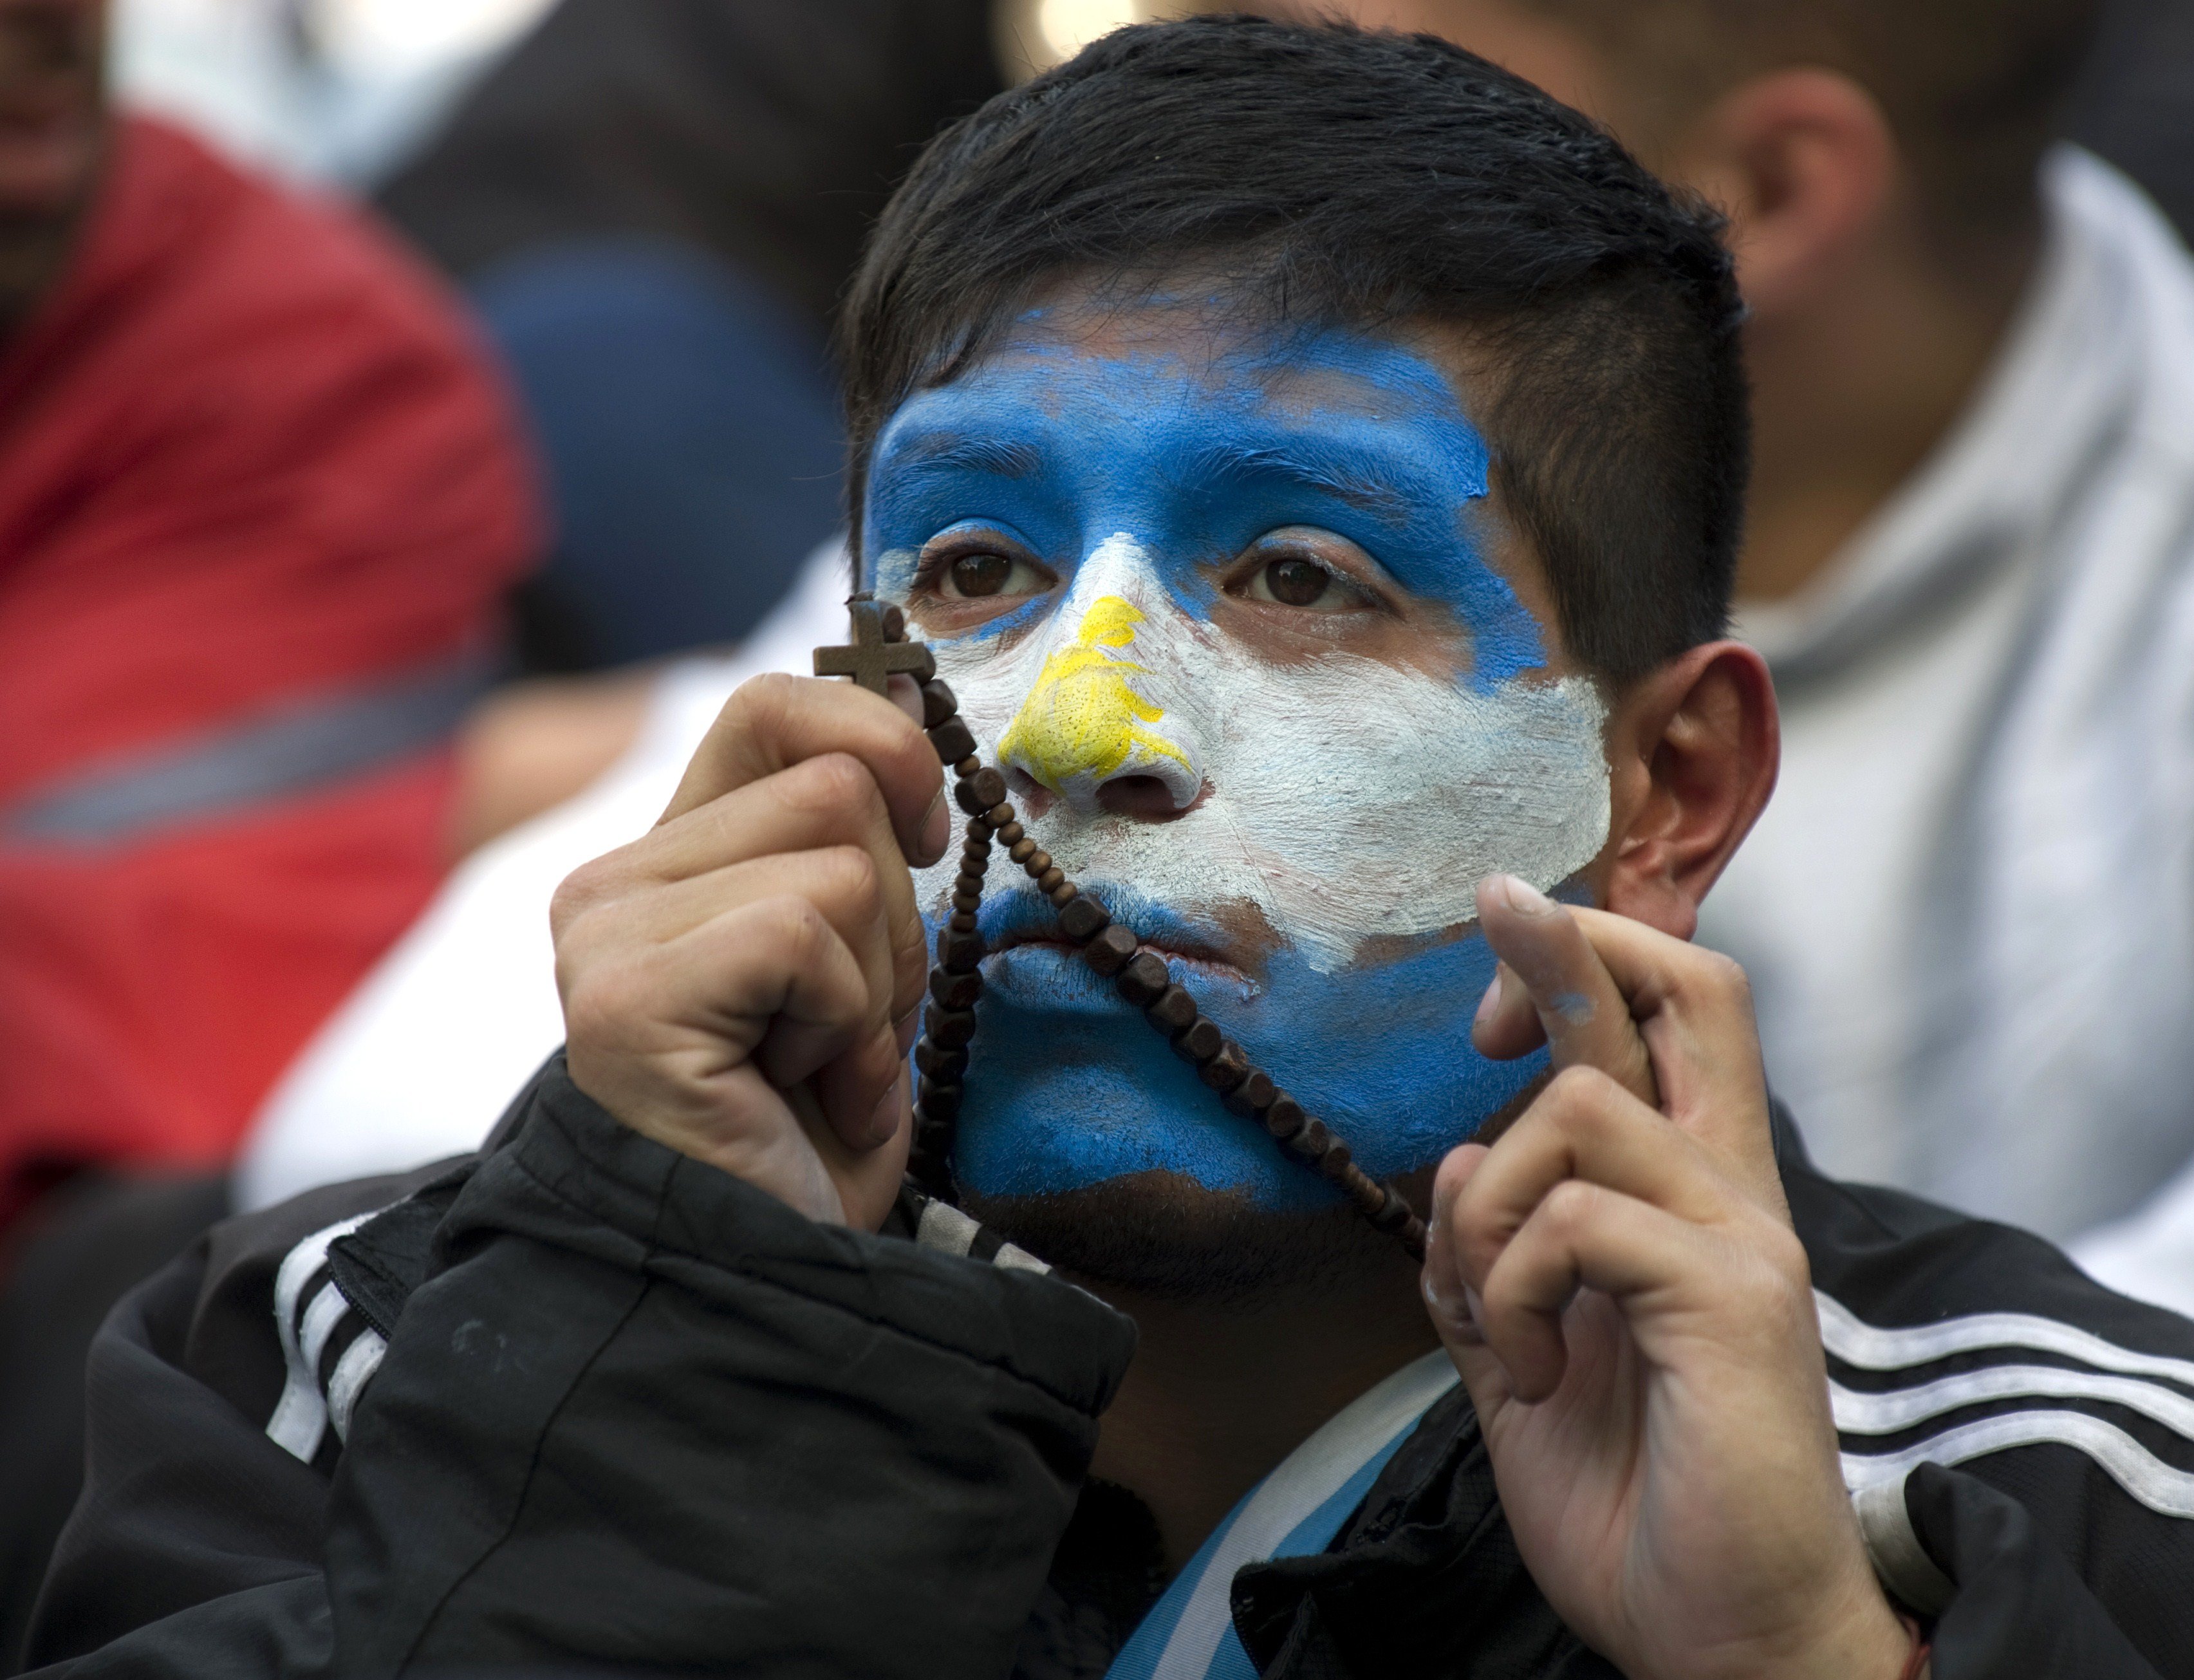 An Argentine fan reacts while watching the match against Nigeria on a big screen at San Martin Square, in Buenos Aires on June 25, 2014.